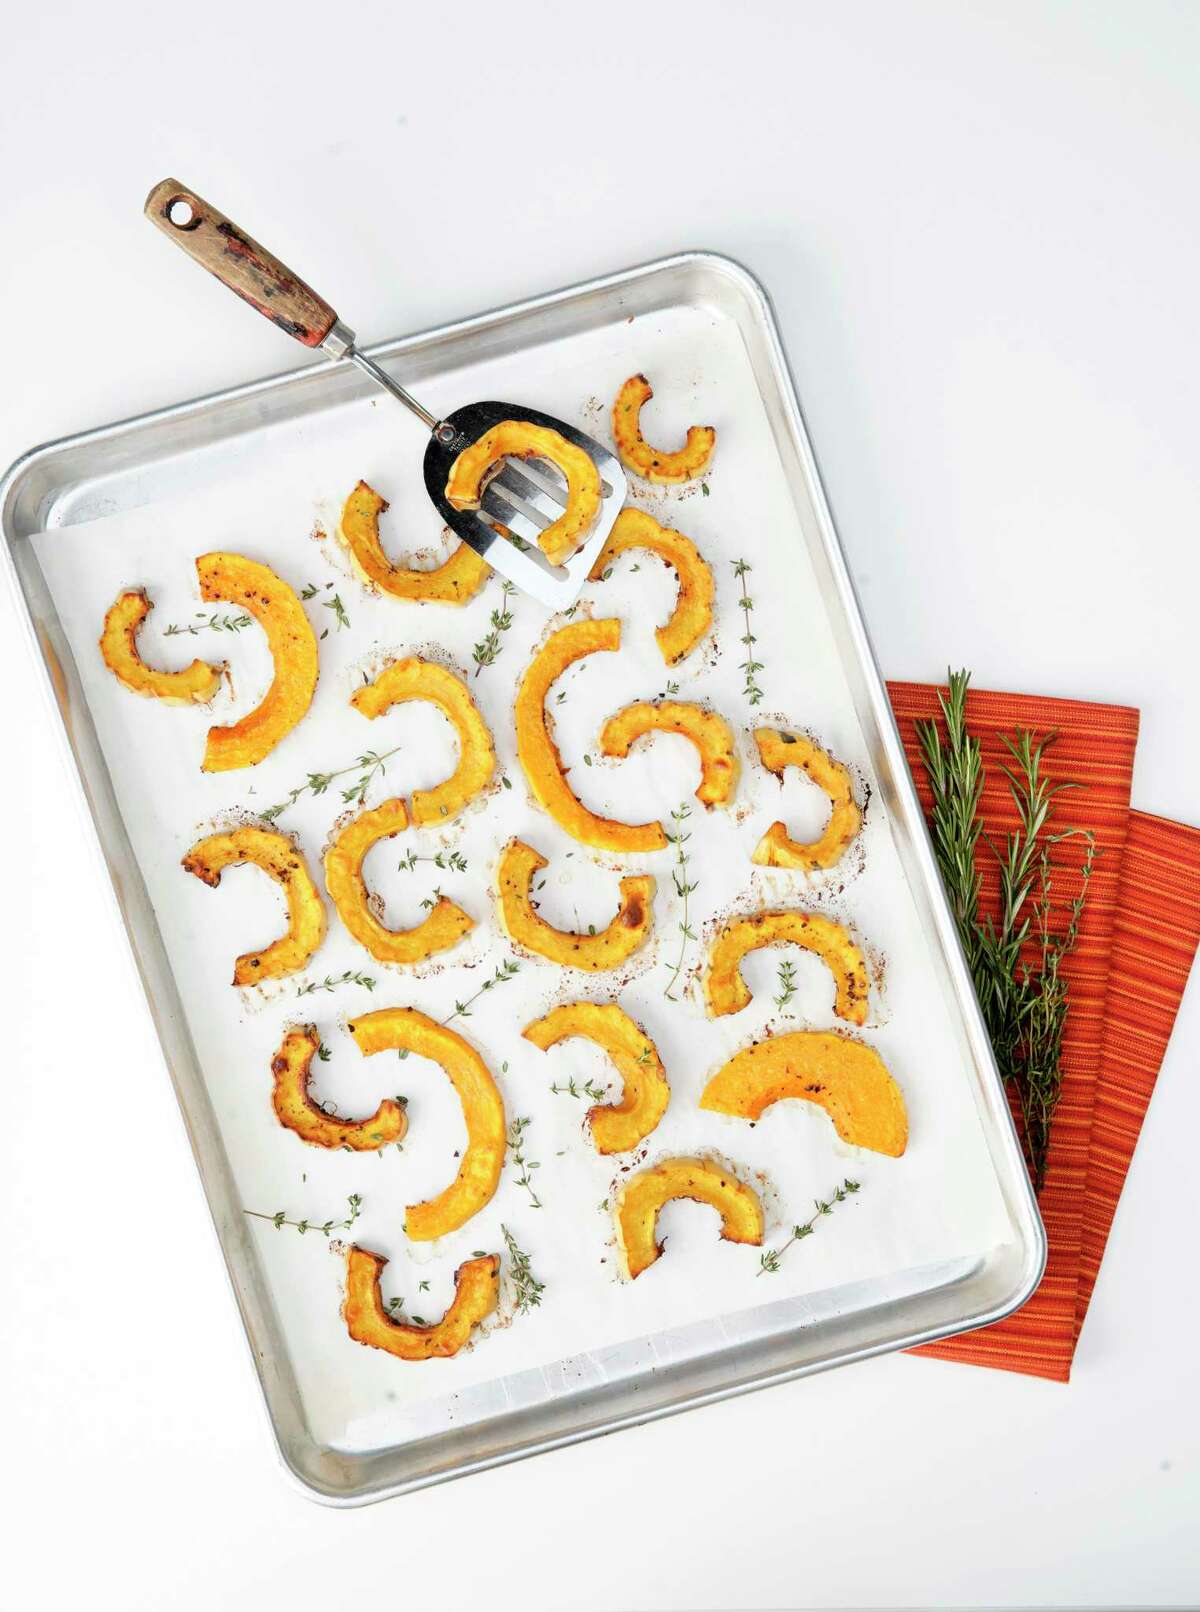 Roasted delicata squash takes only about half an hour in a hot oven.